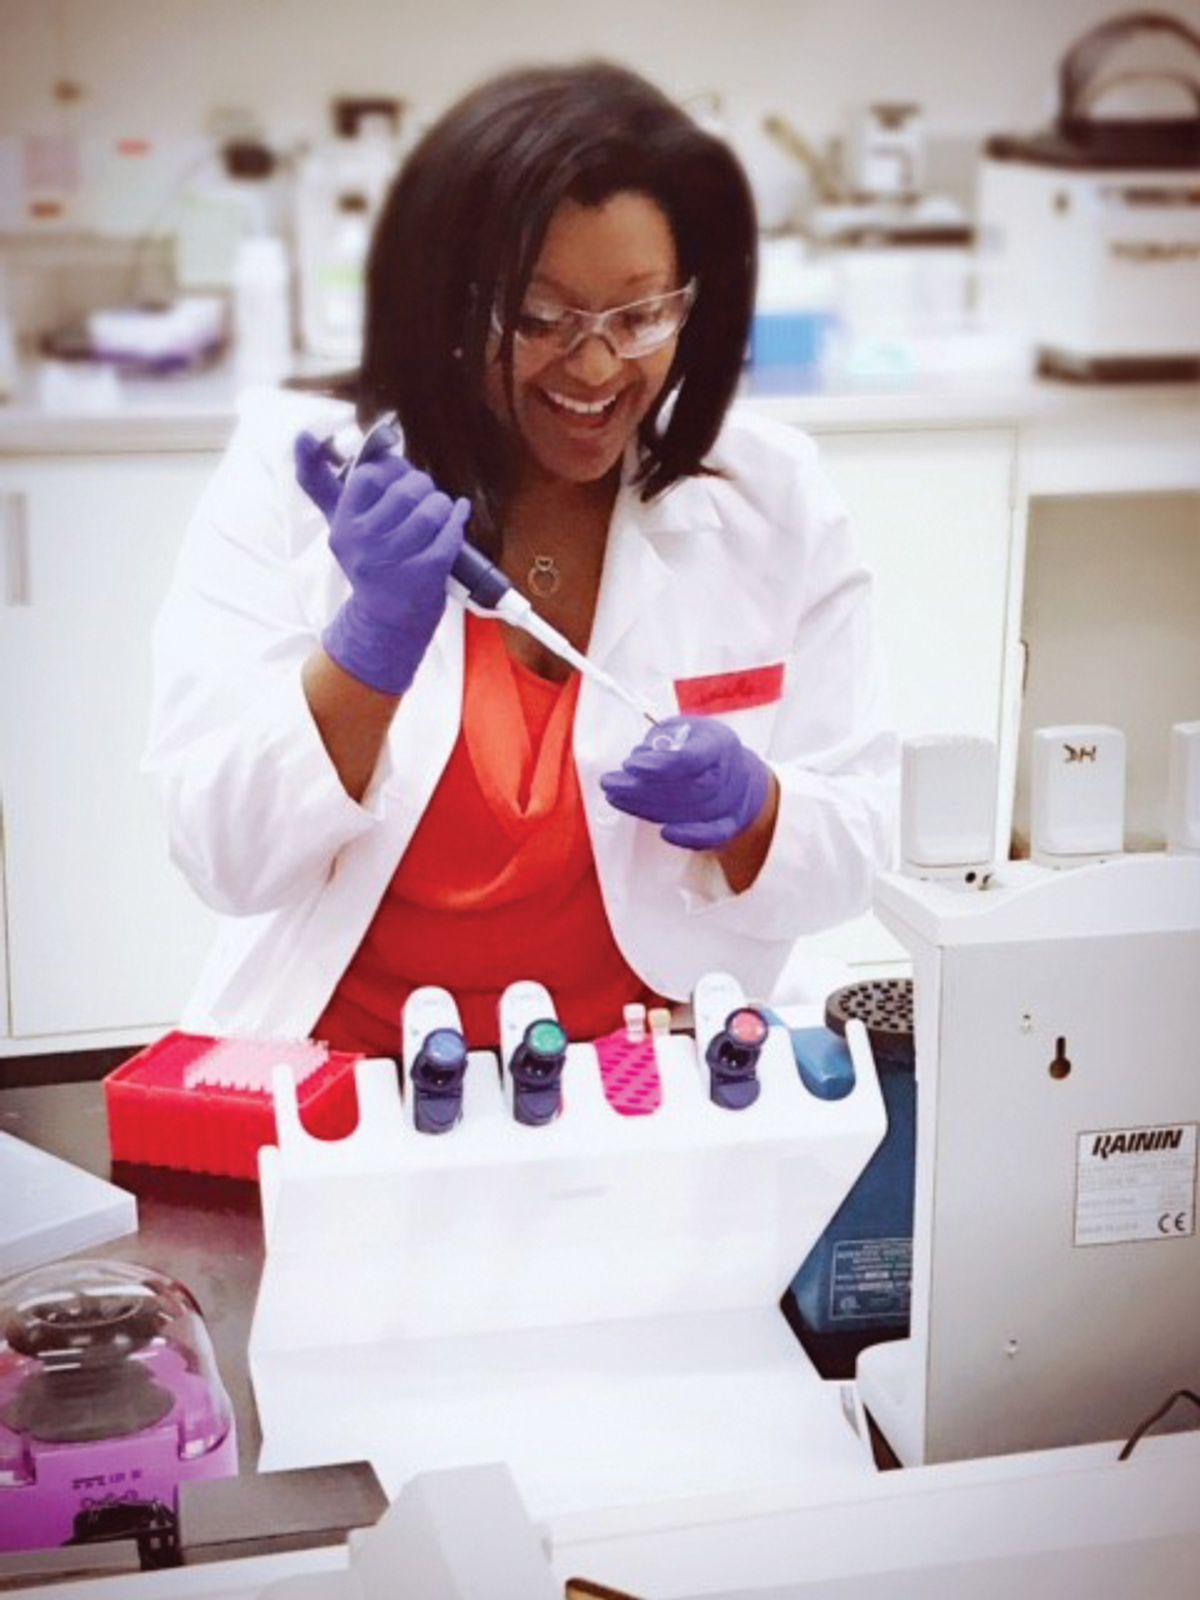 Samantha Maragh is wearing a white lab coat and holding a pipette in the lab.